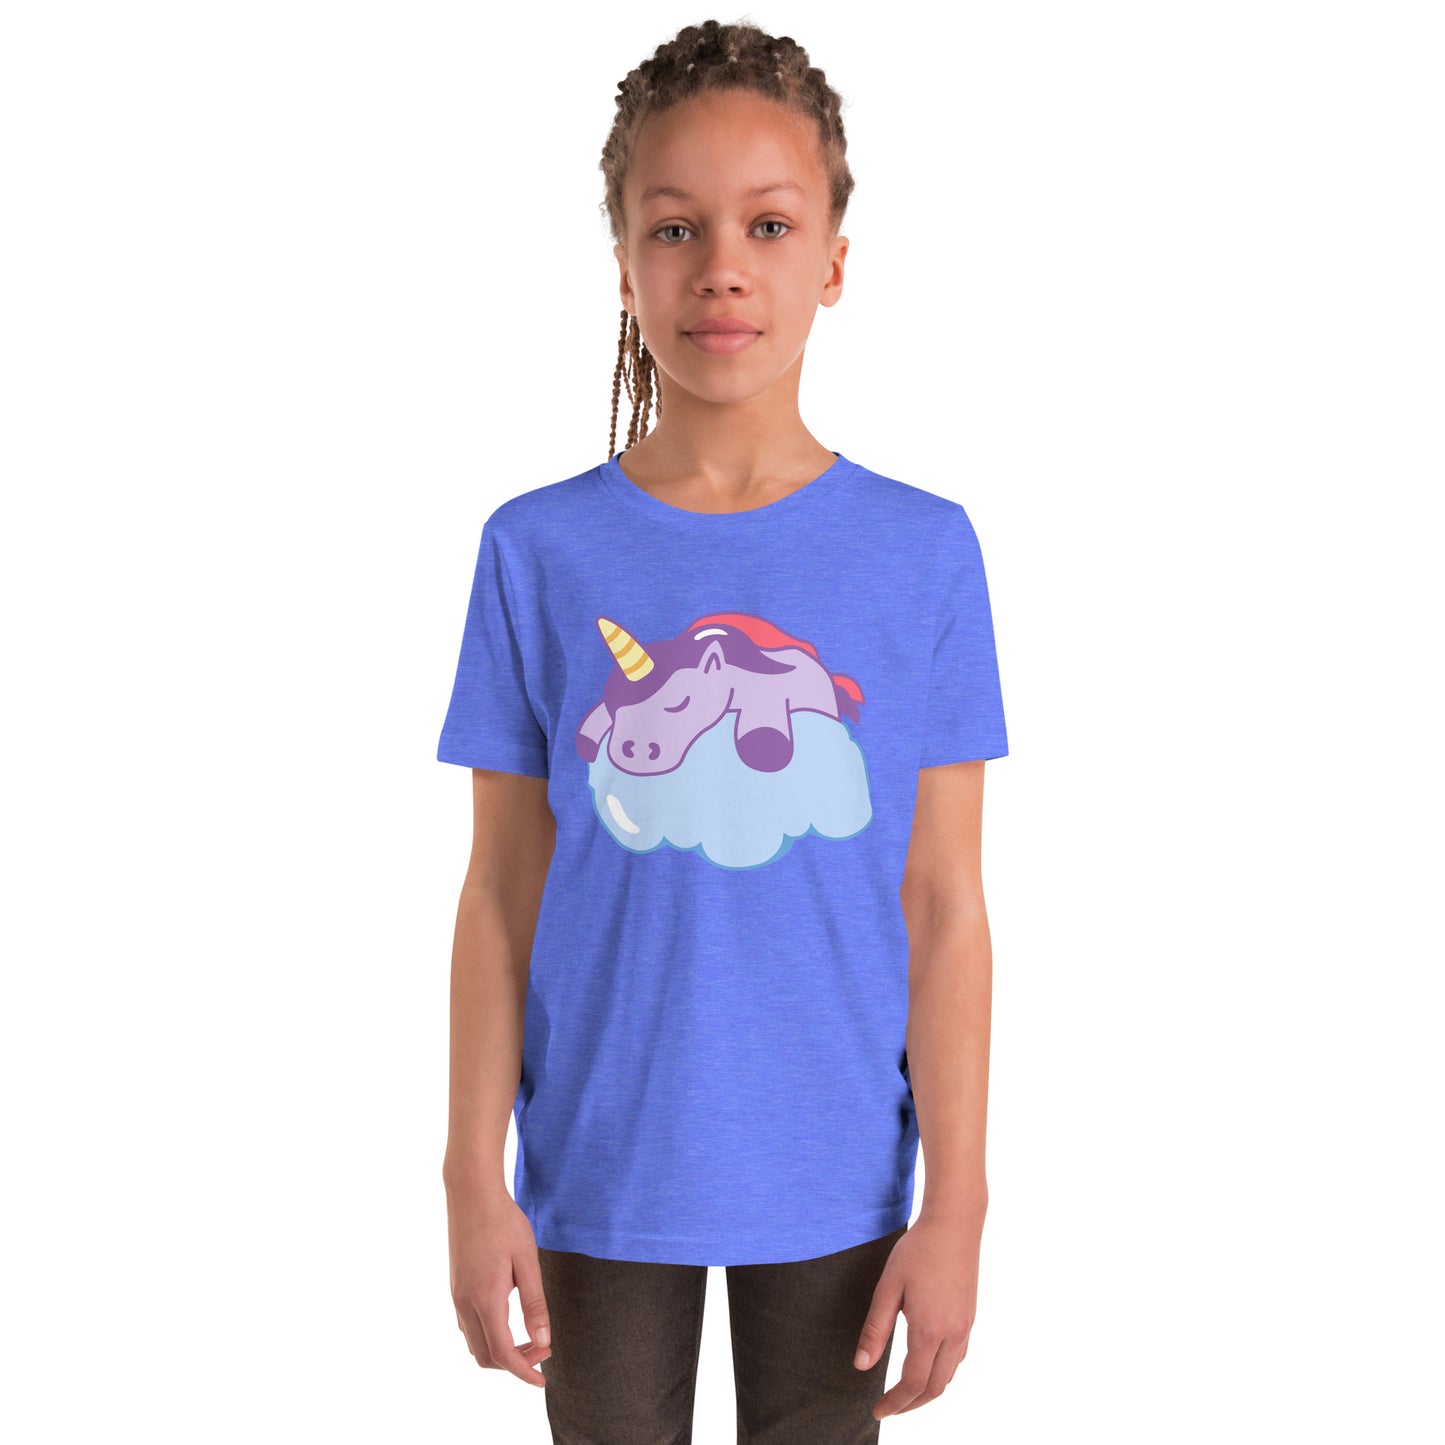 Youth with a columbia blue T-shirt with a print of a sleeping unicorn on a cloud